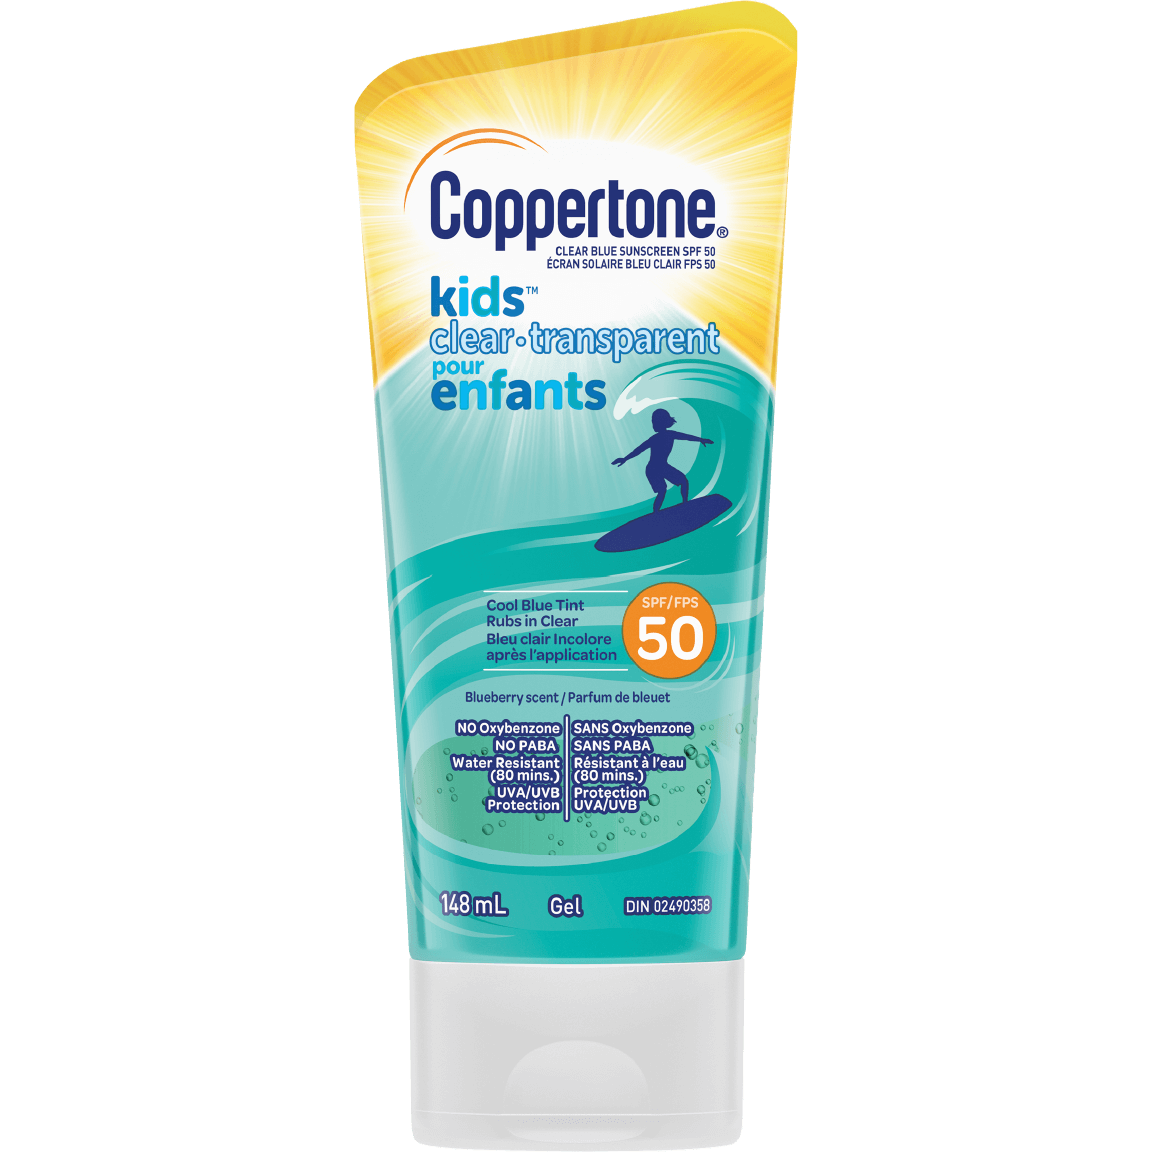 Coppertone_Kids Clear Lotion